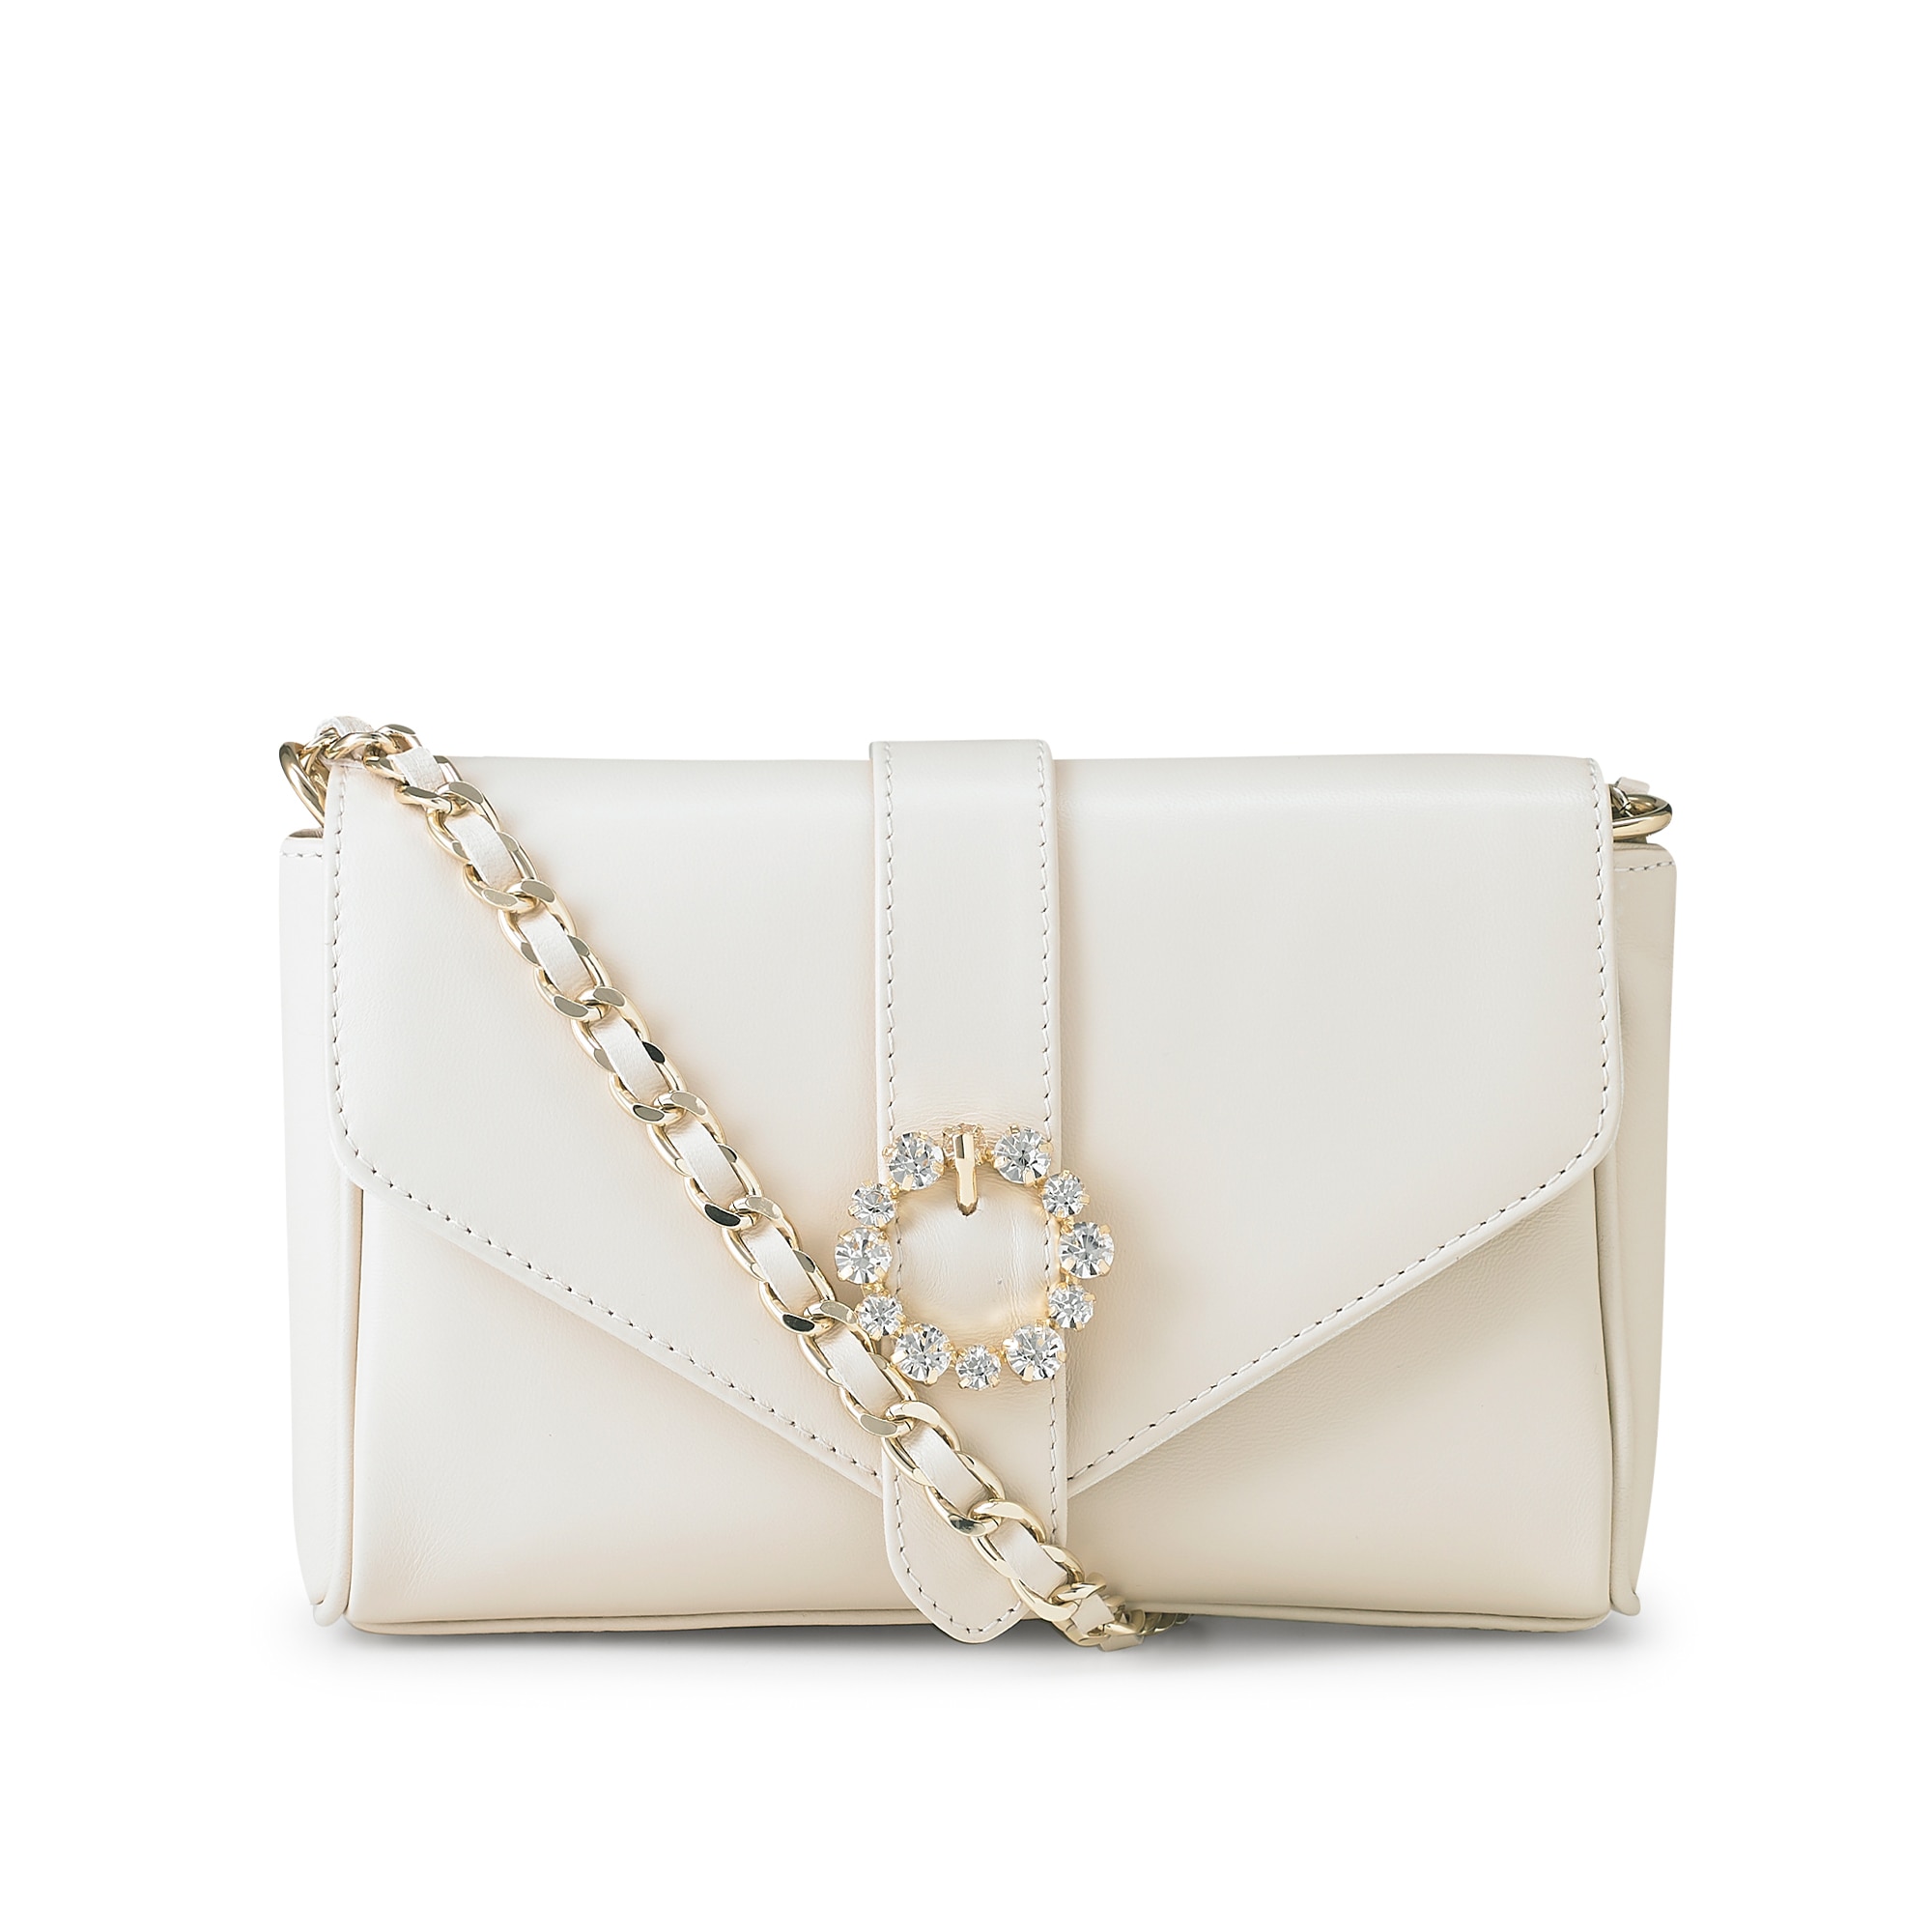 Russell & Bromley Women's Beige Nappa Leather Embellished Strictly Jewel Buckle Chain Shoulder Bag, Size: 9x15x6cm